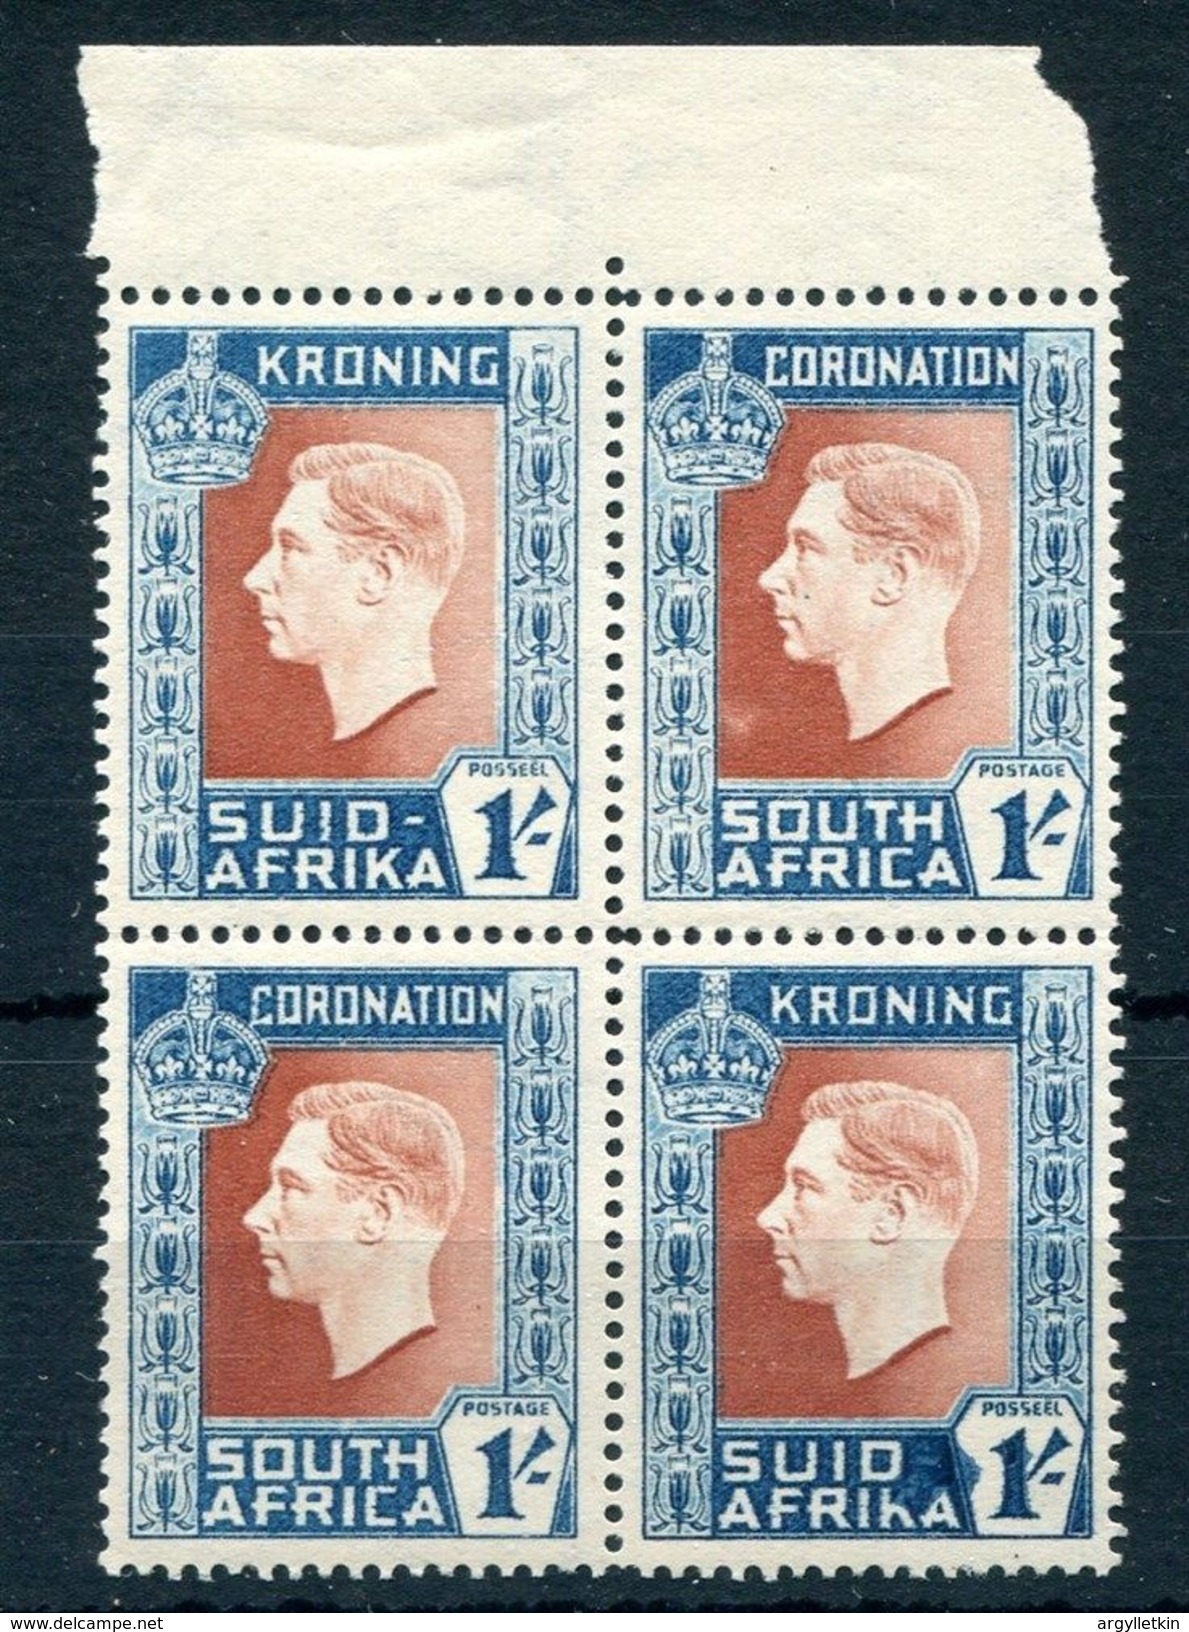 SOUTH AFRICA 1937 KING GEORGE 6th CORONATION VARIETY HYPHEN OMITTED - Unclassified